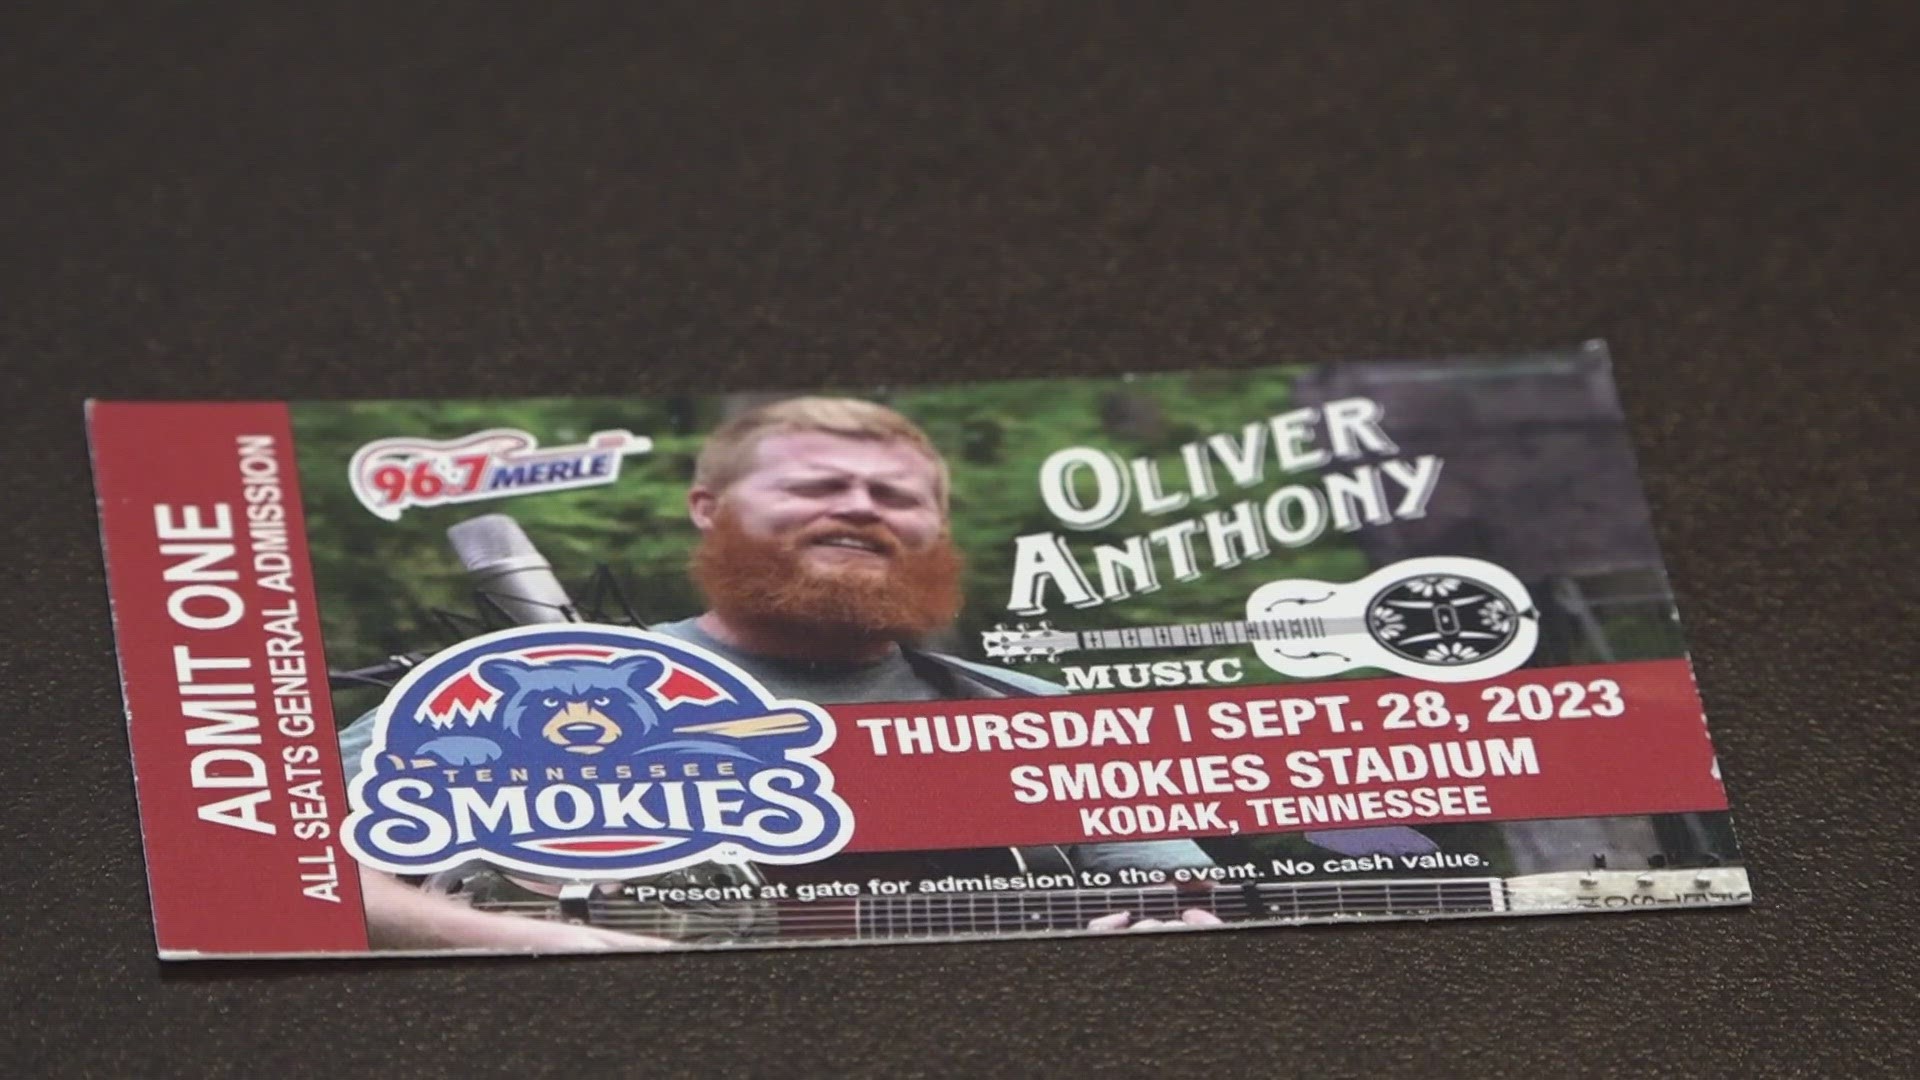 Oliver Anthony is set to play at the stadium Thursday night.